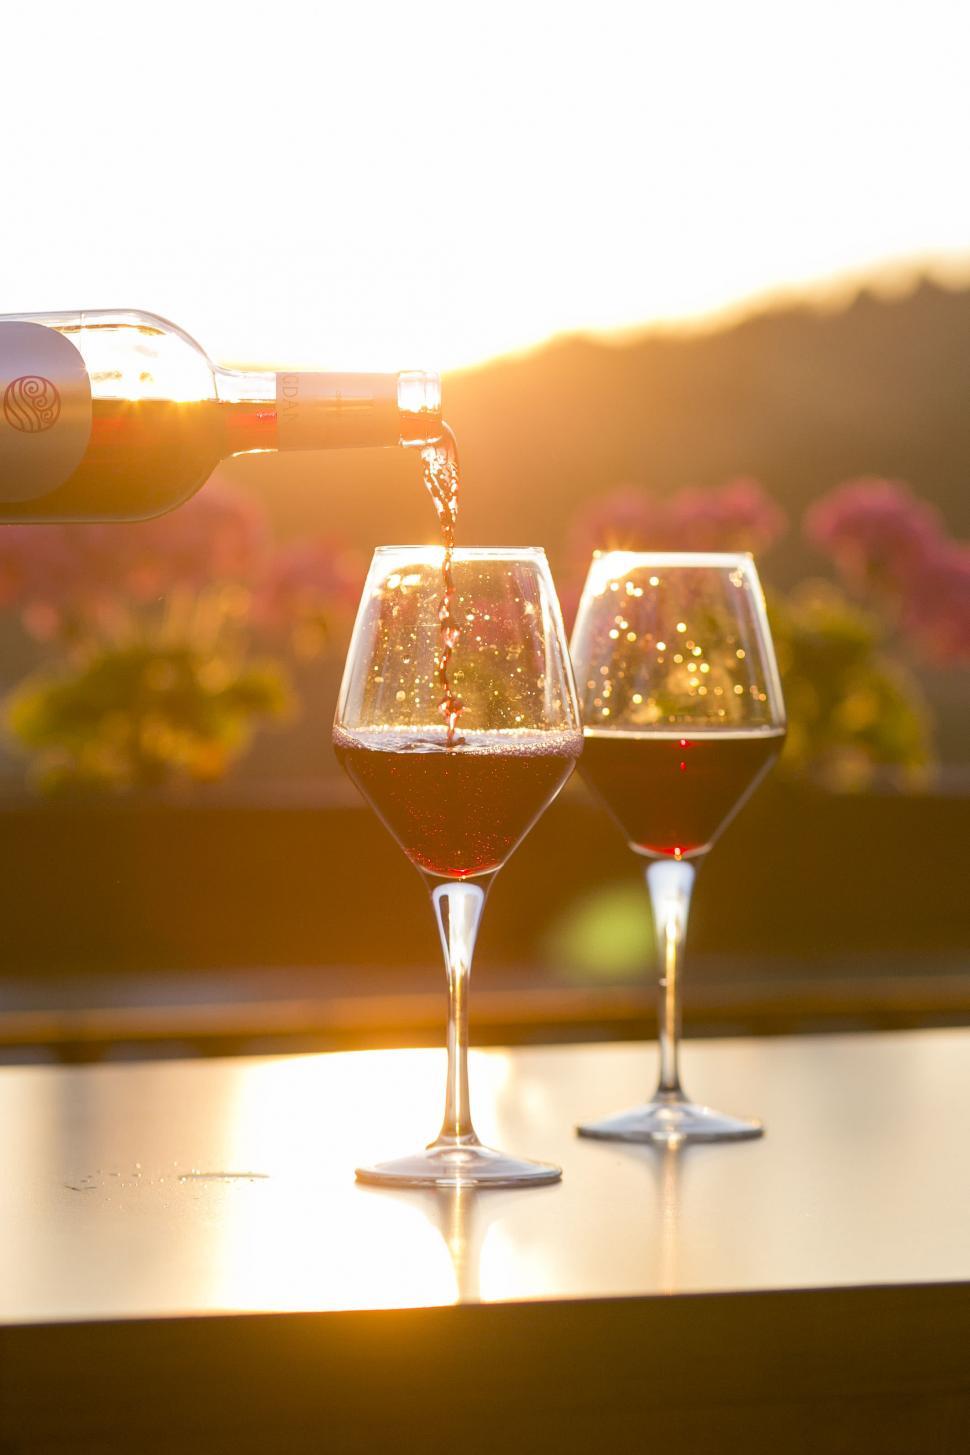 Free Image of Red wine pouring into glasses at sunset 